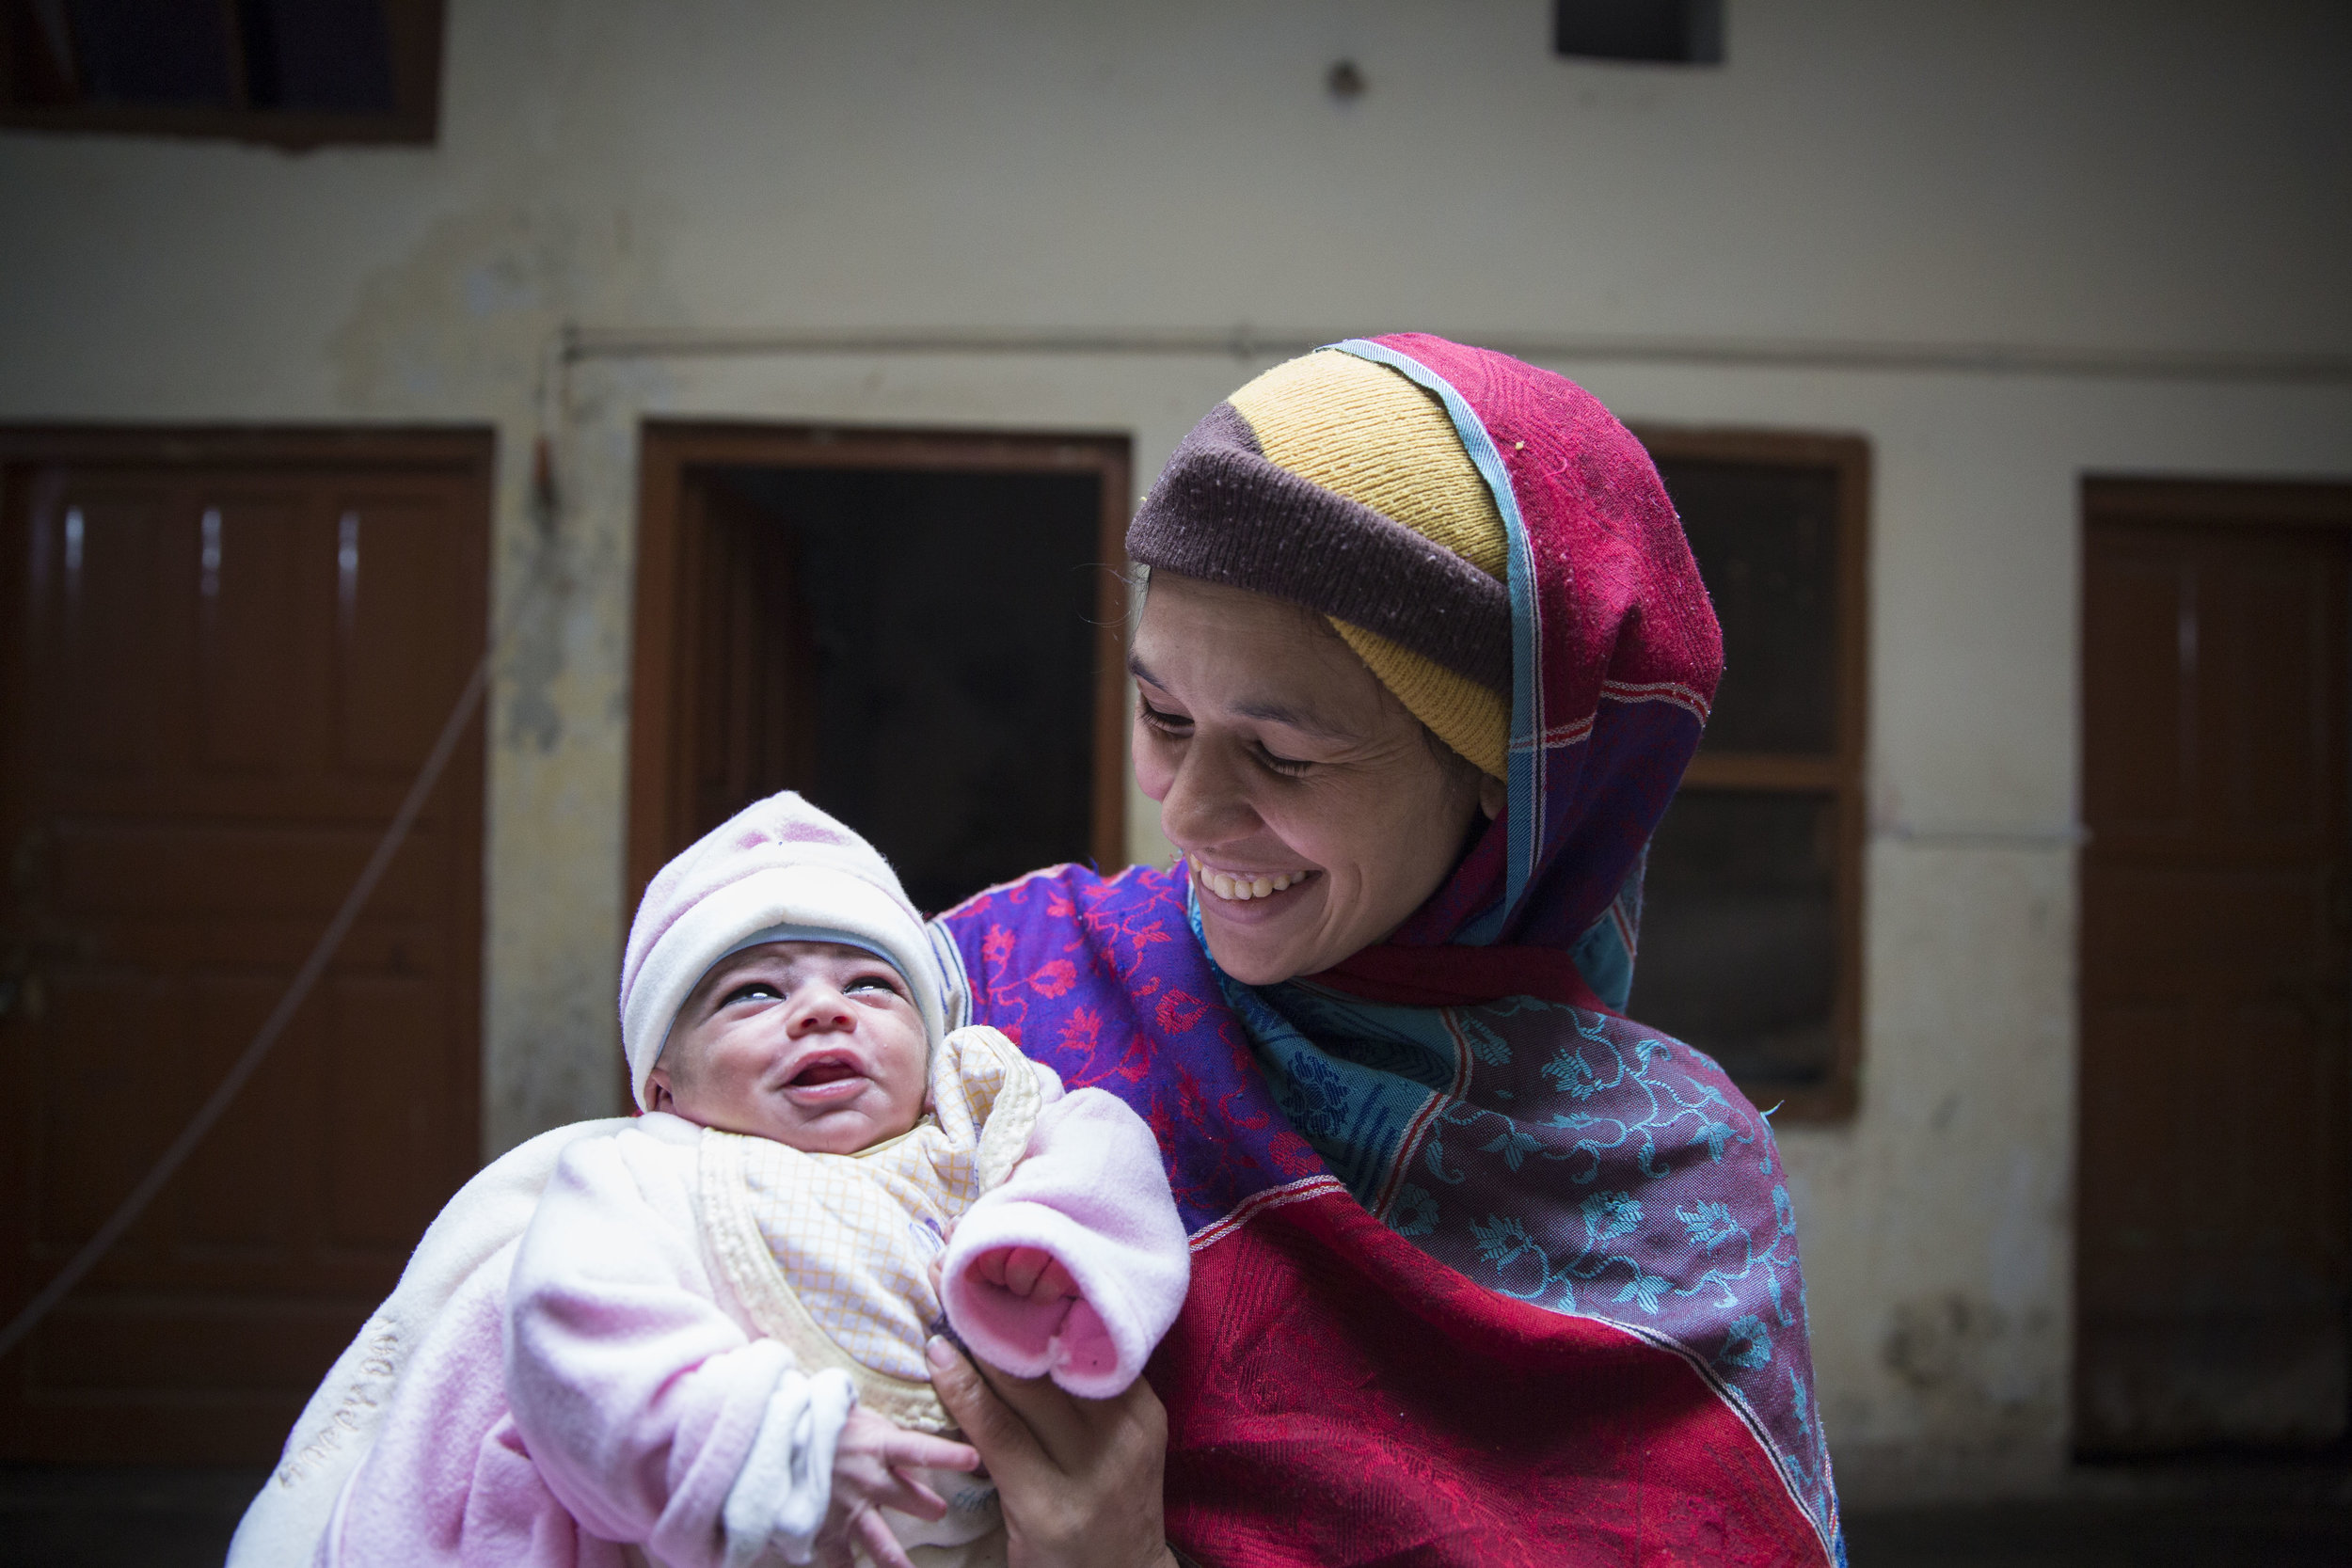  Sobia Sajid along with her newly born baby Ahmed Sajid at their residence after nine days since her delivery where she suffered from postpartum haemorrhaging. 